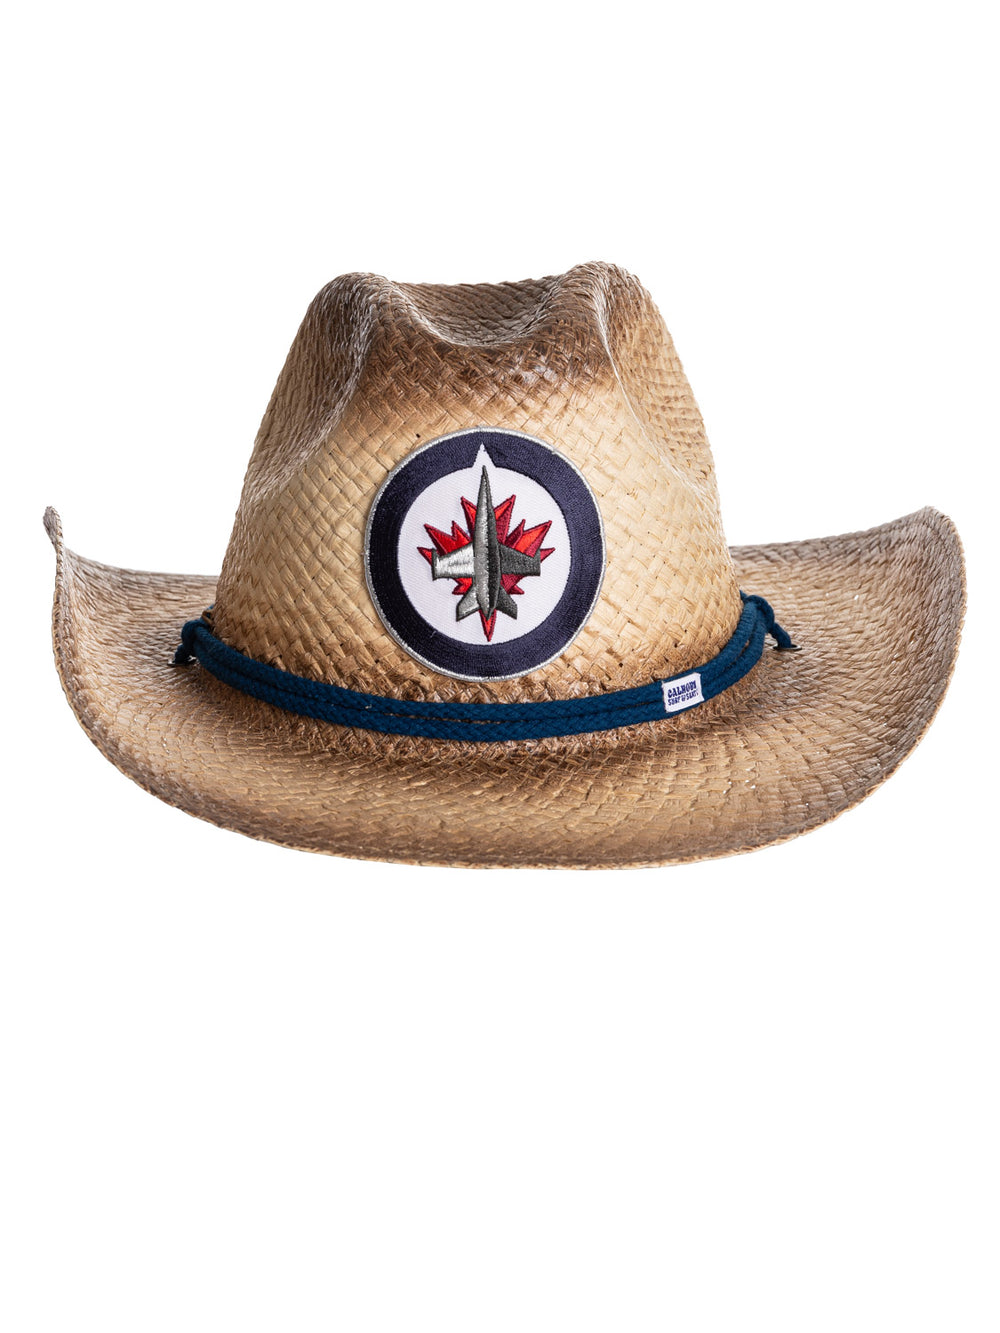 The front of the Winnipeg Jets straw cowboy hat. It is a tan straw hat with the Jets logo in the centre of it, with a navy blue rope running along the crown of the hat.